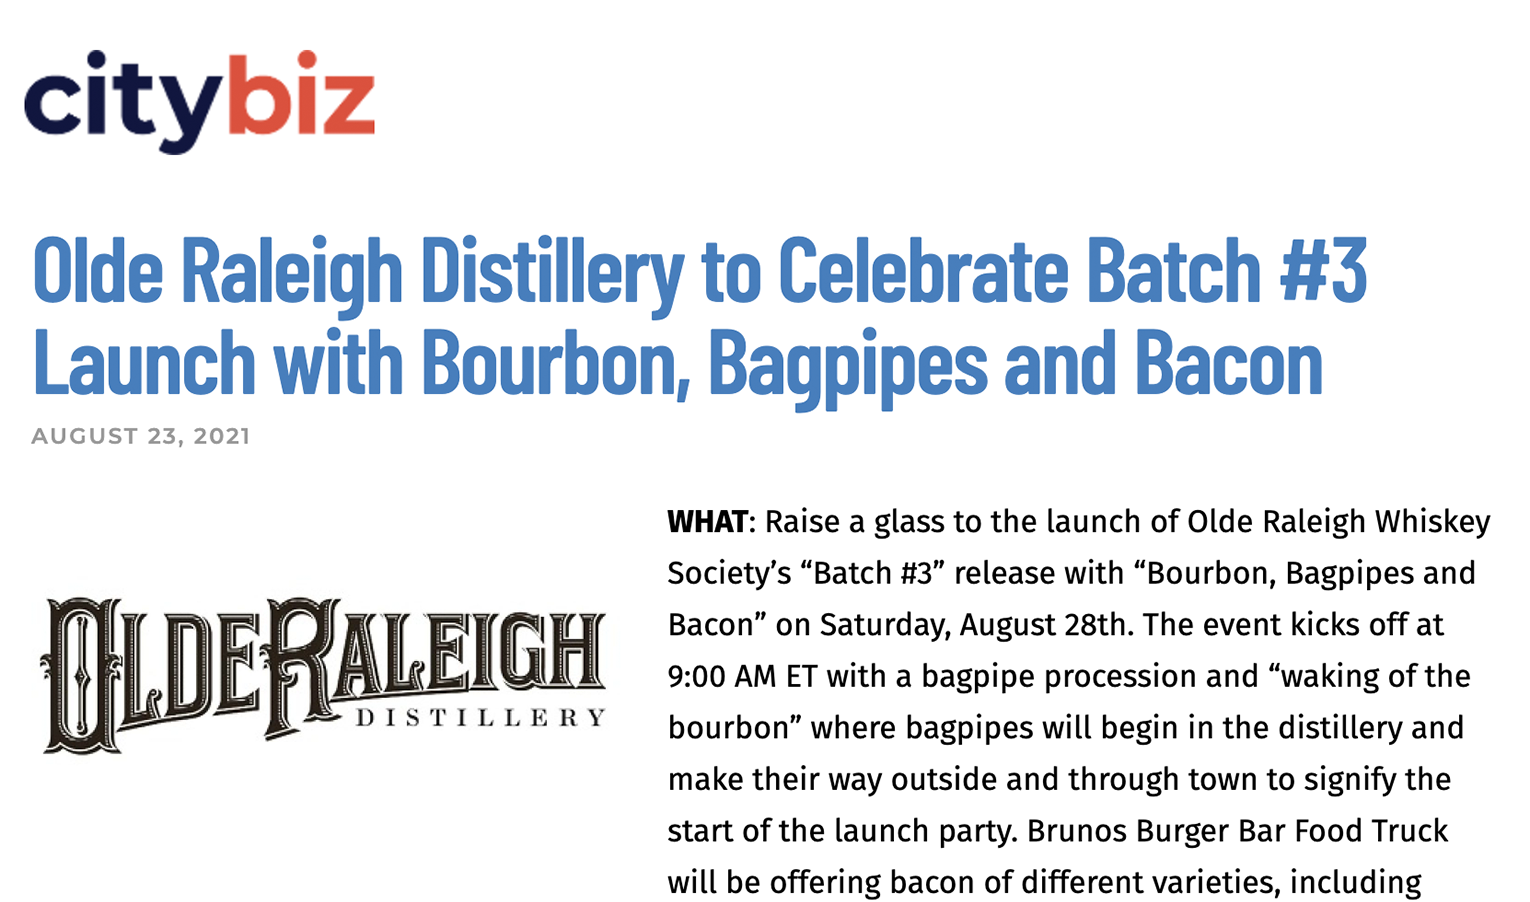 Olde Raleigh Distillery to celebrate batch #3 launch with bourbon, bagpipes and bacon in raleigh, nc